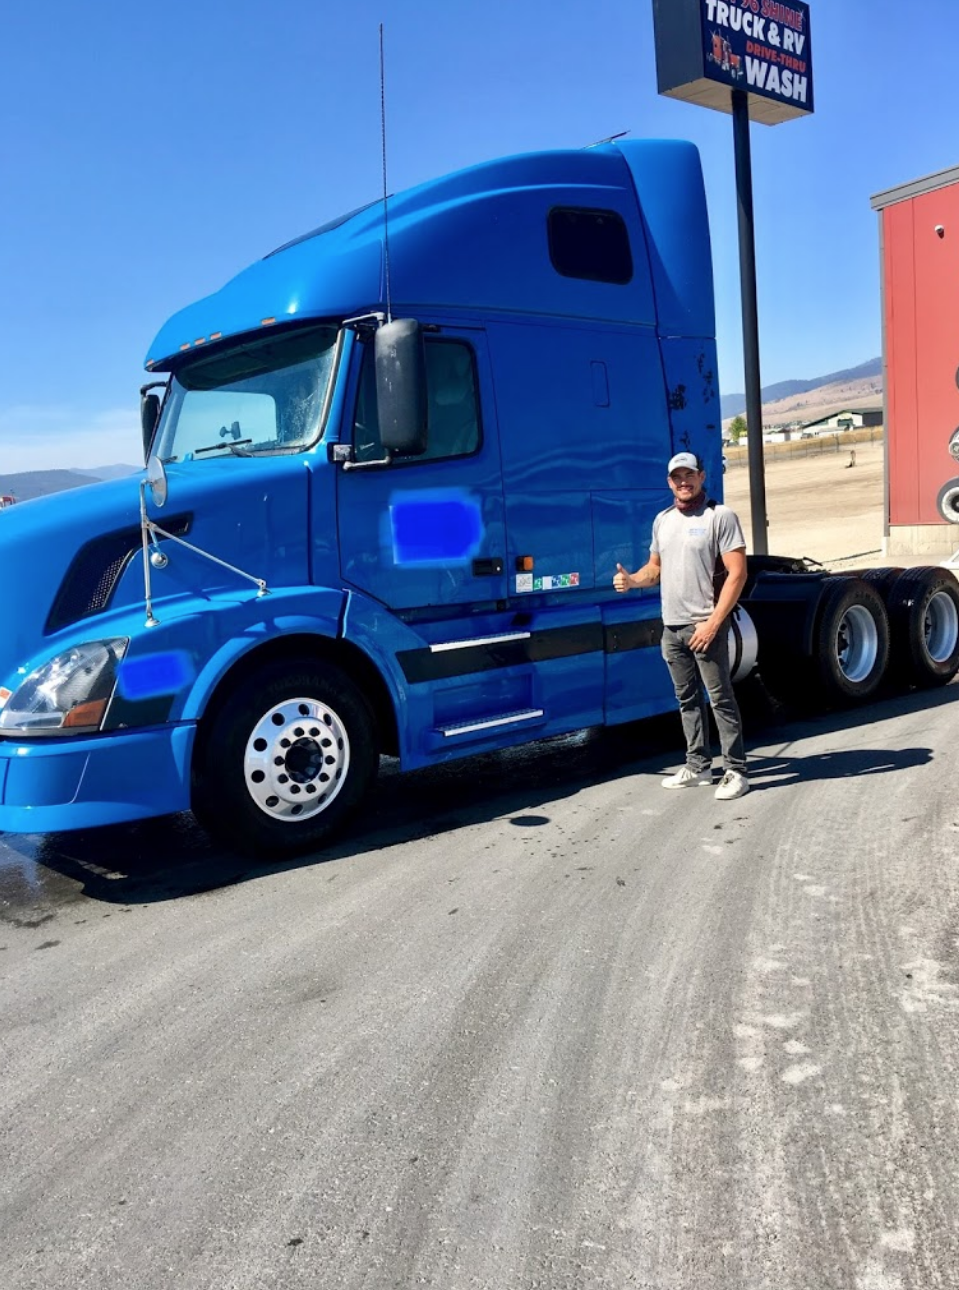 " THIS IS THE SINGLE BEST TRUCK AND TRAILER WASH IN THE UNITED STATES!! PRICES ARE EFFICIENT!! "